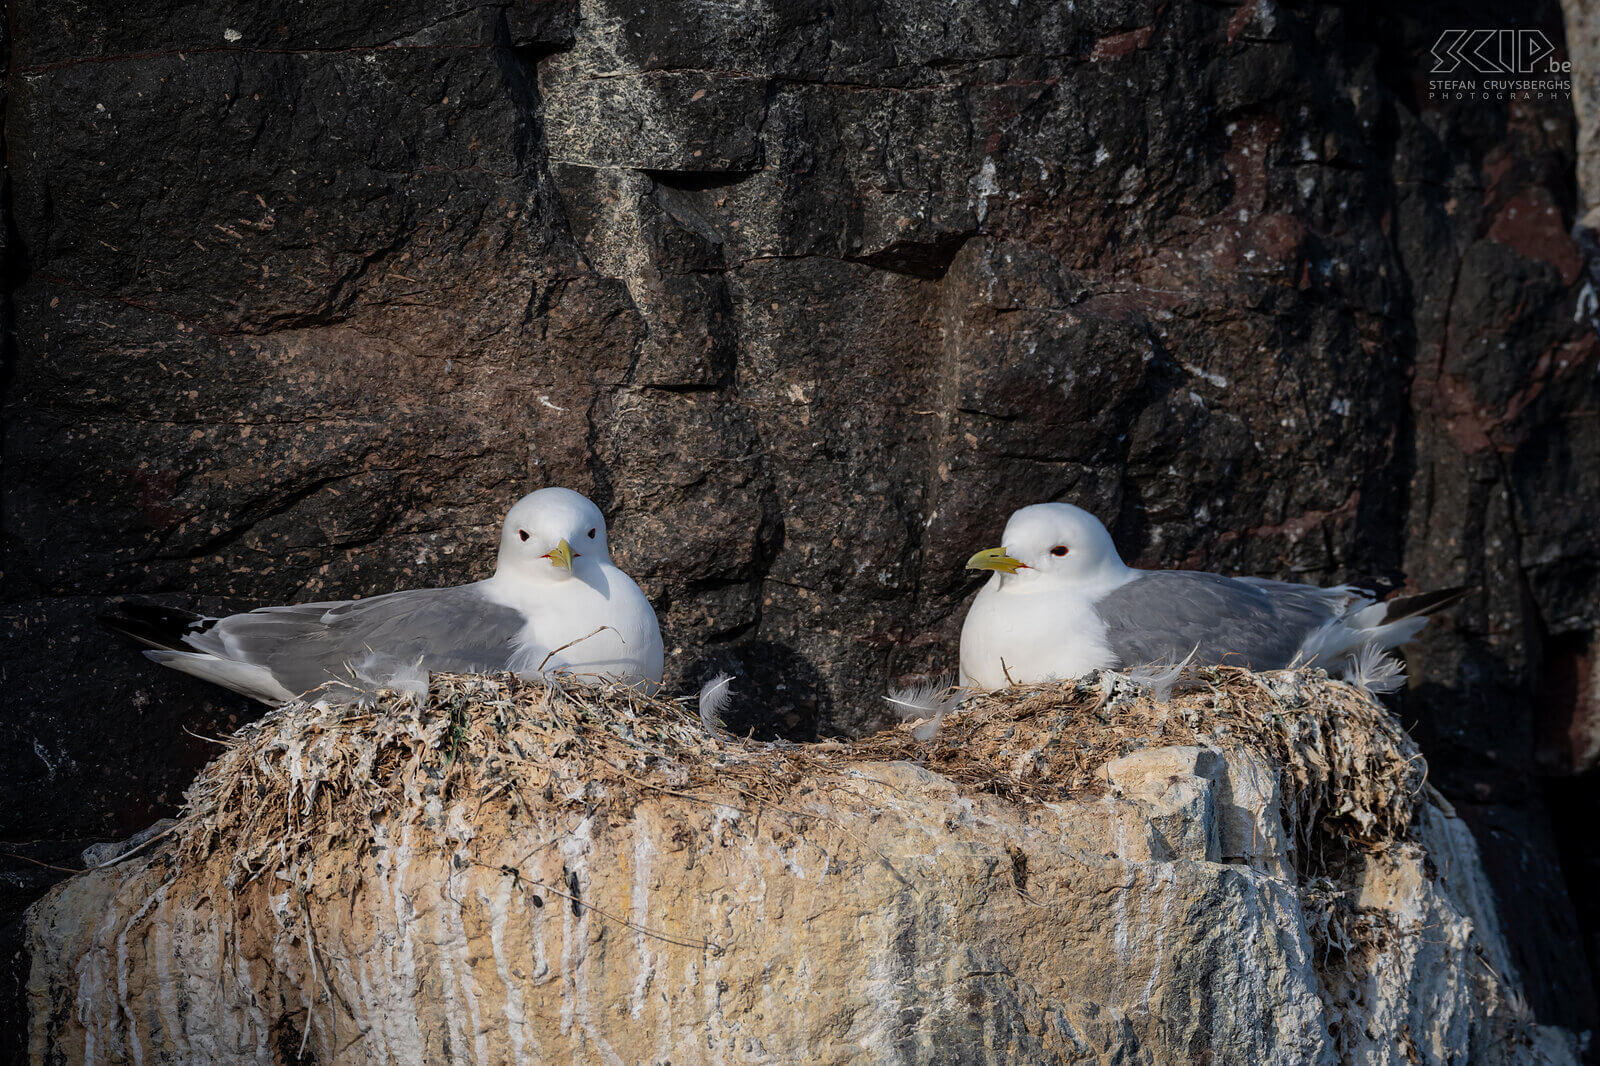 Farne Islands - Kittiwakes The steep cliffs of the Farne Islands are also home to many breeding pairs of kittiwakes in the spring. These seagulls are called 'kittiwake' after their characteristic call. They live at sea almost all year round and the young birds have to jump off the high cliffs after 5 to 7 weeks. Stefan Cruysberghs